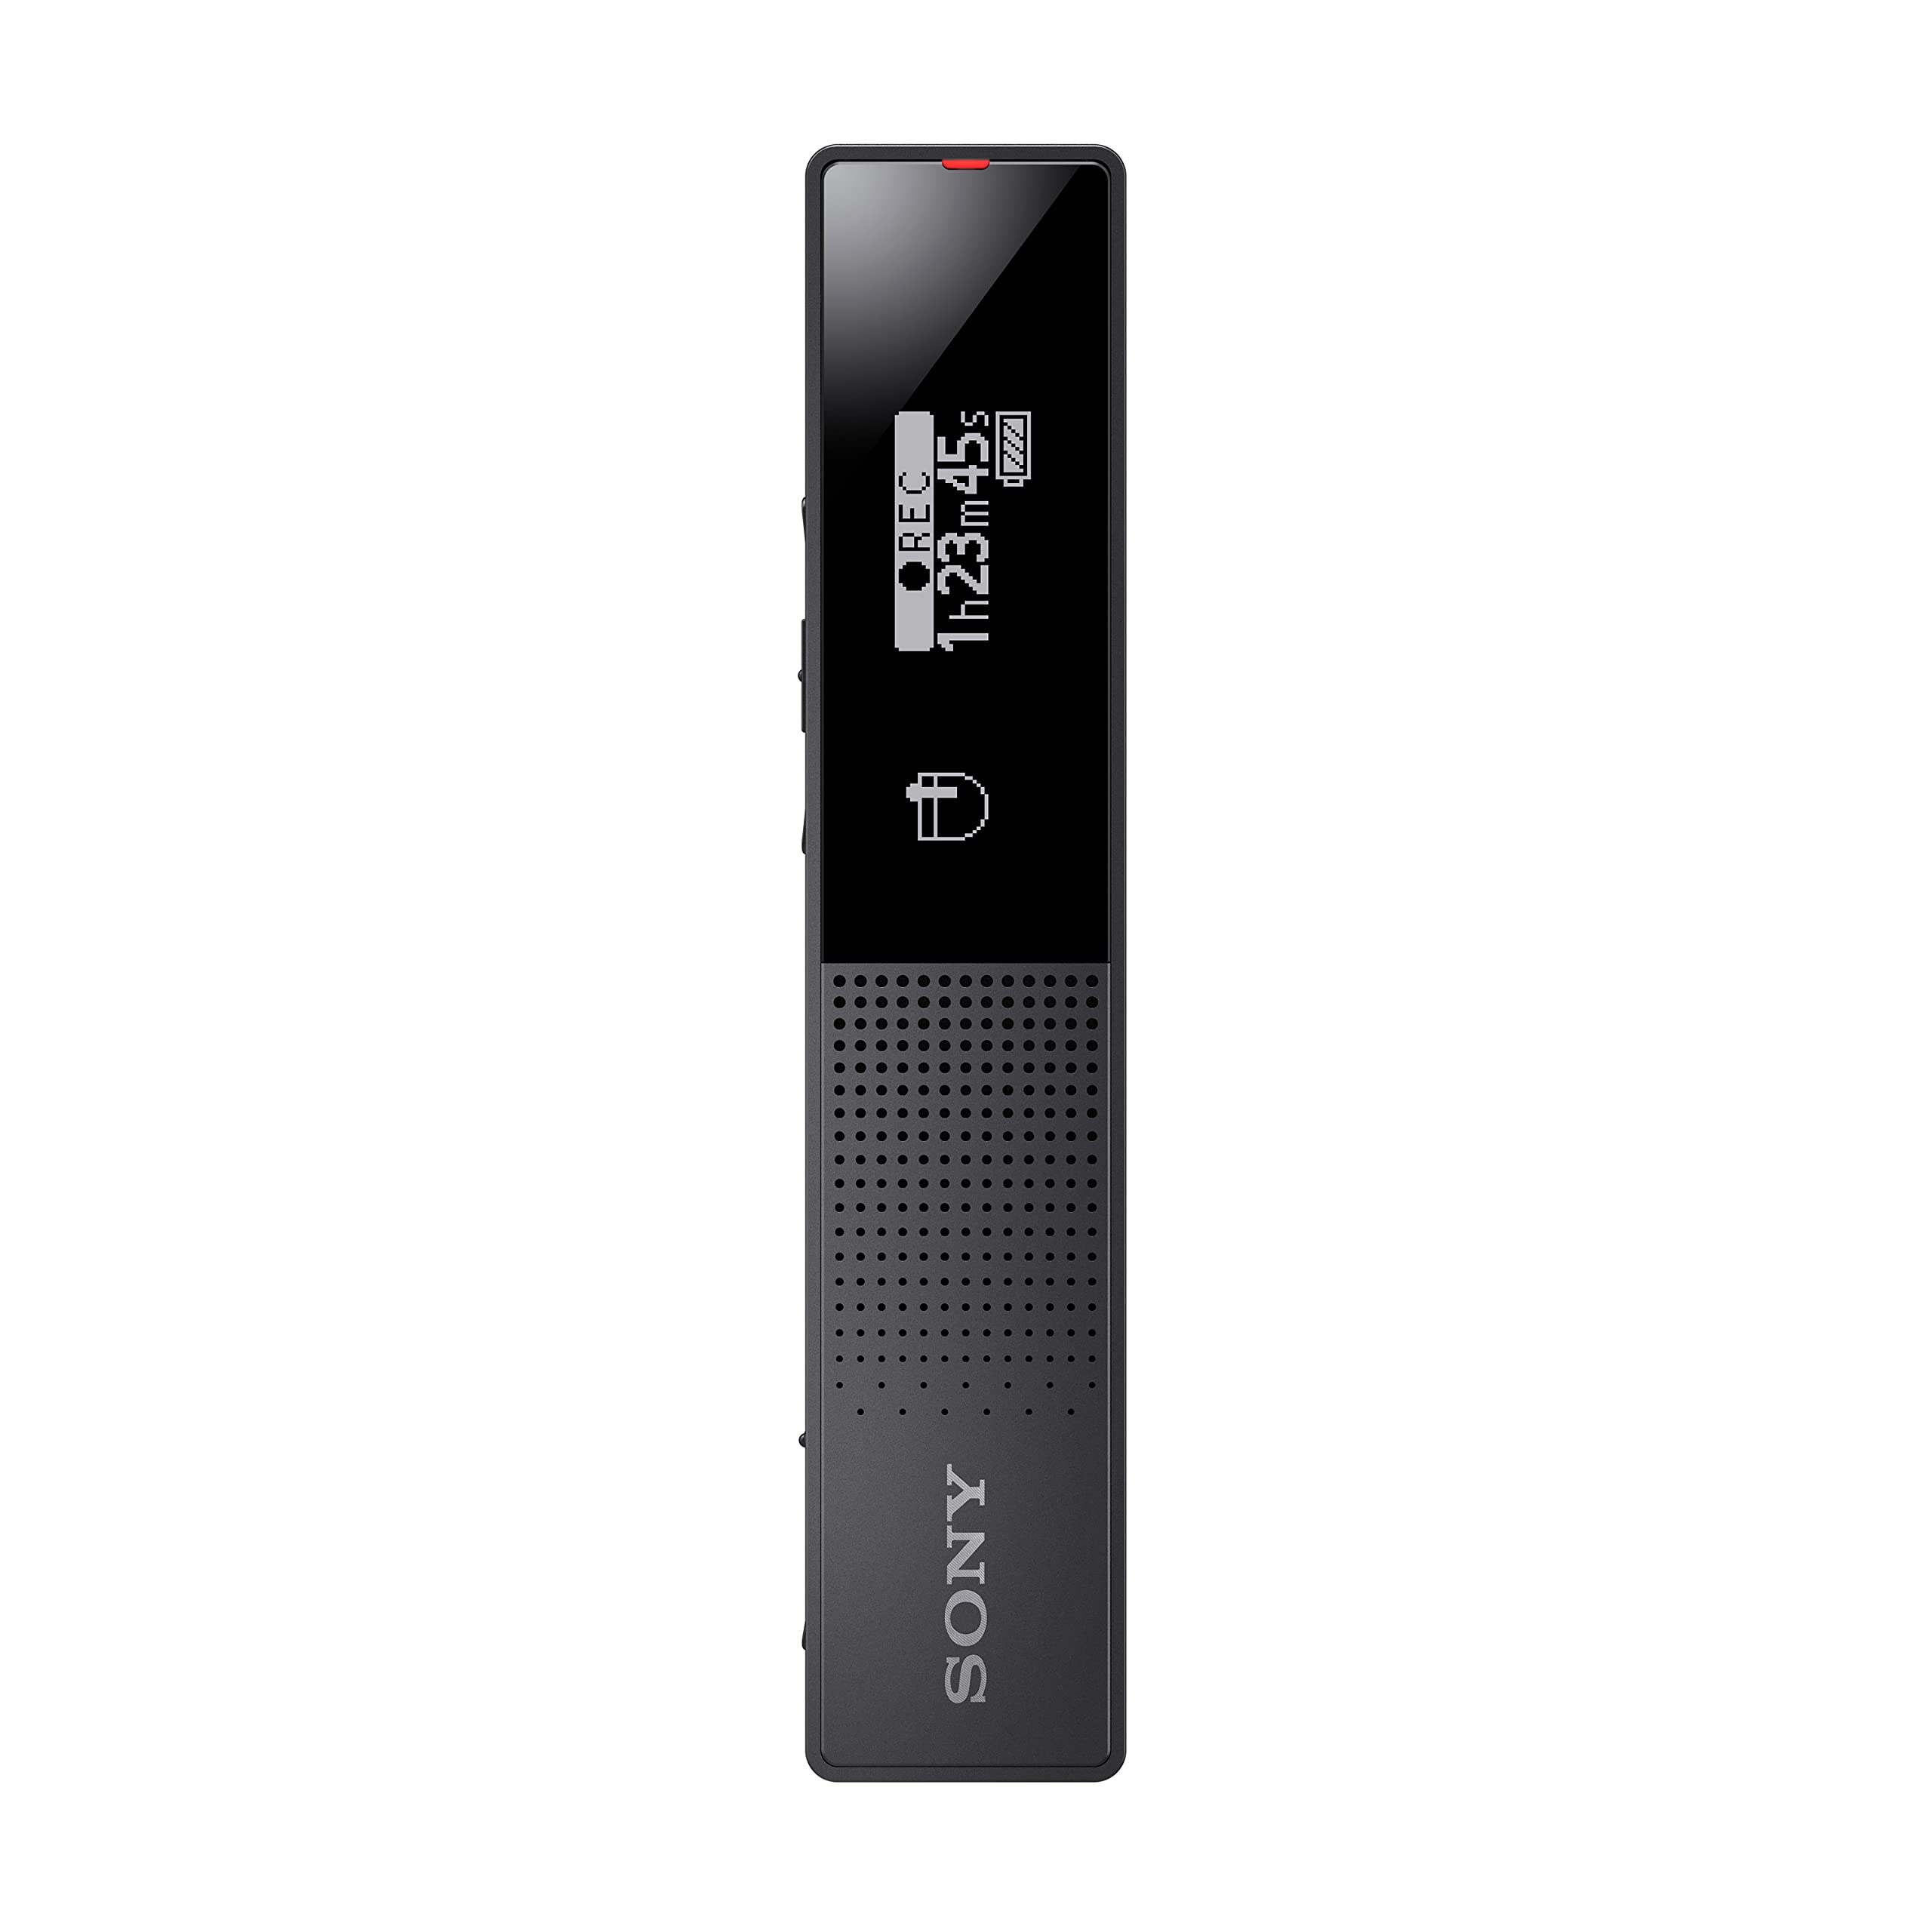 Sony ICD-TX660 - Slim Digital Voice Recorder with OLED Display,Black